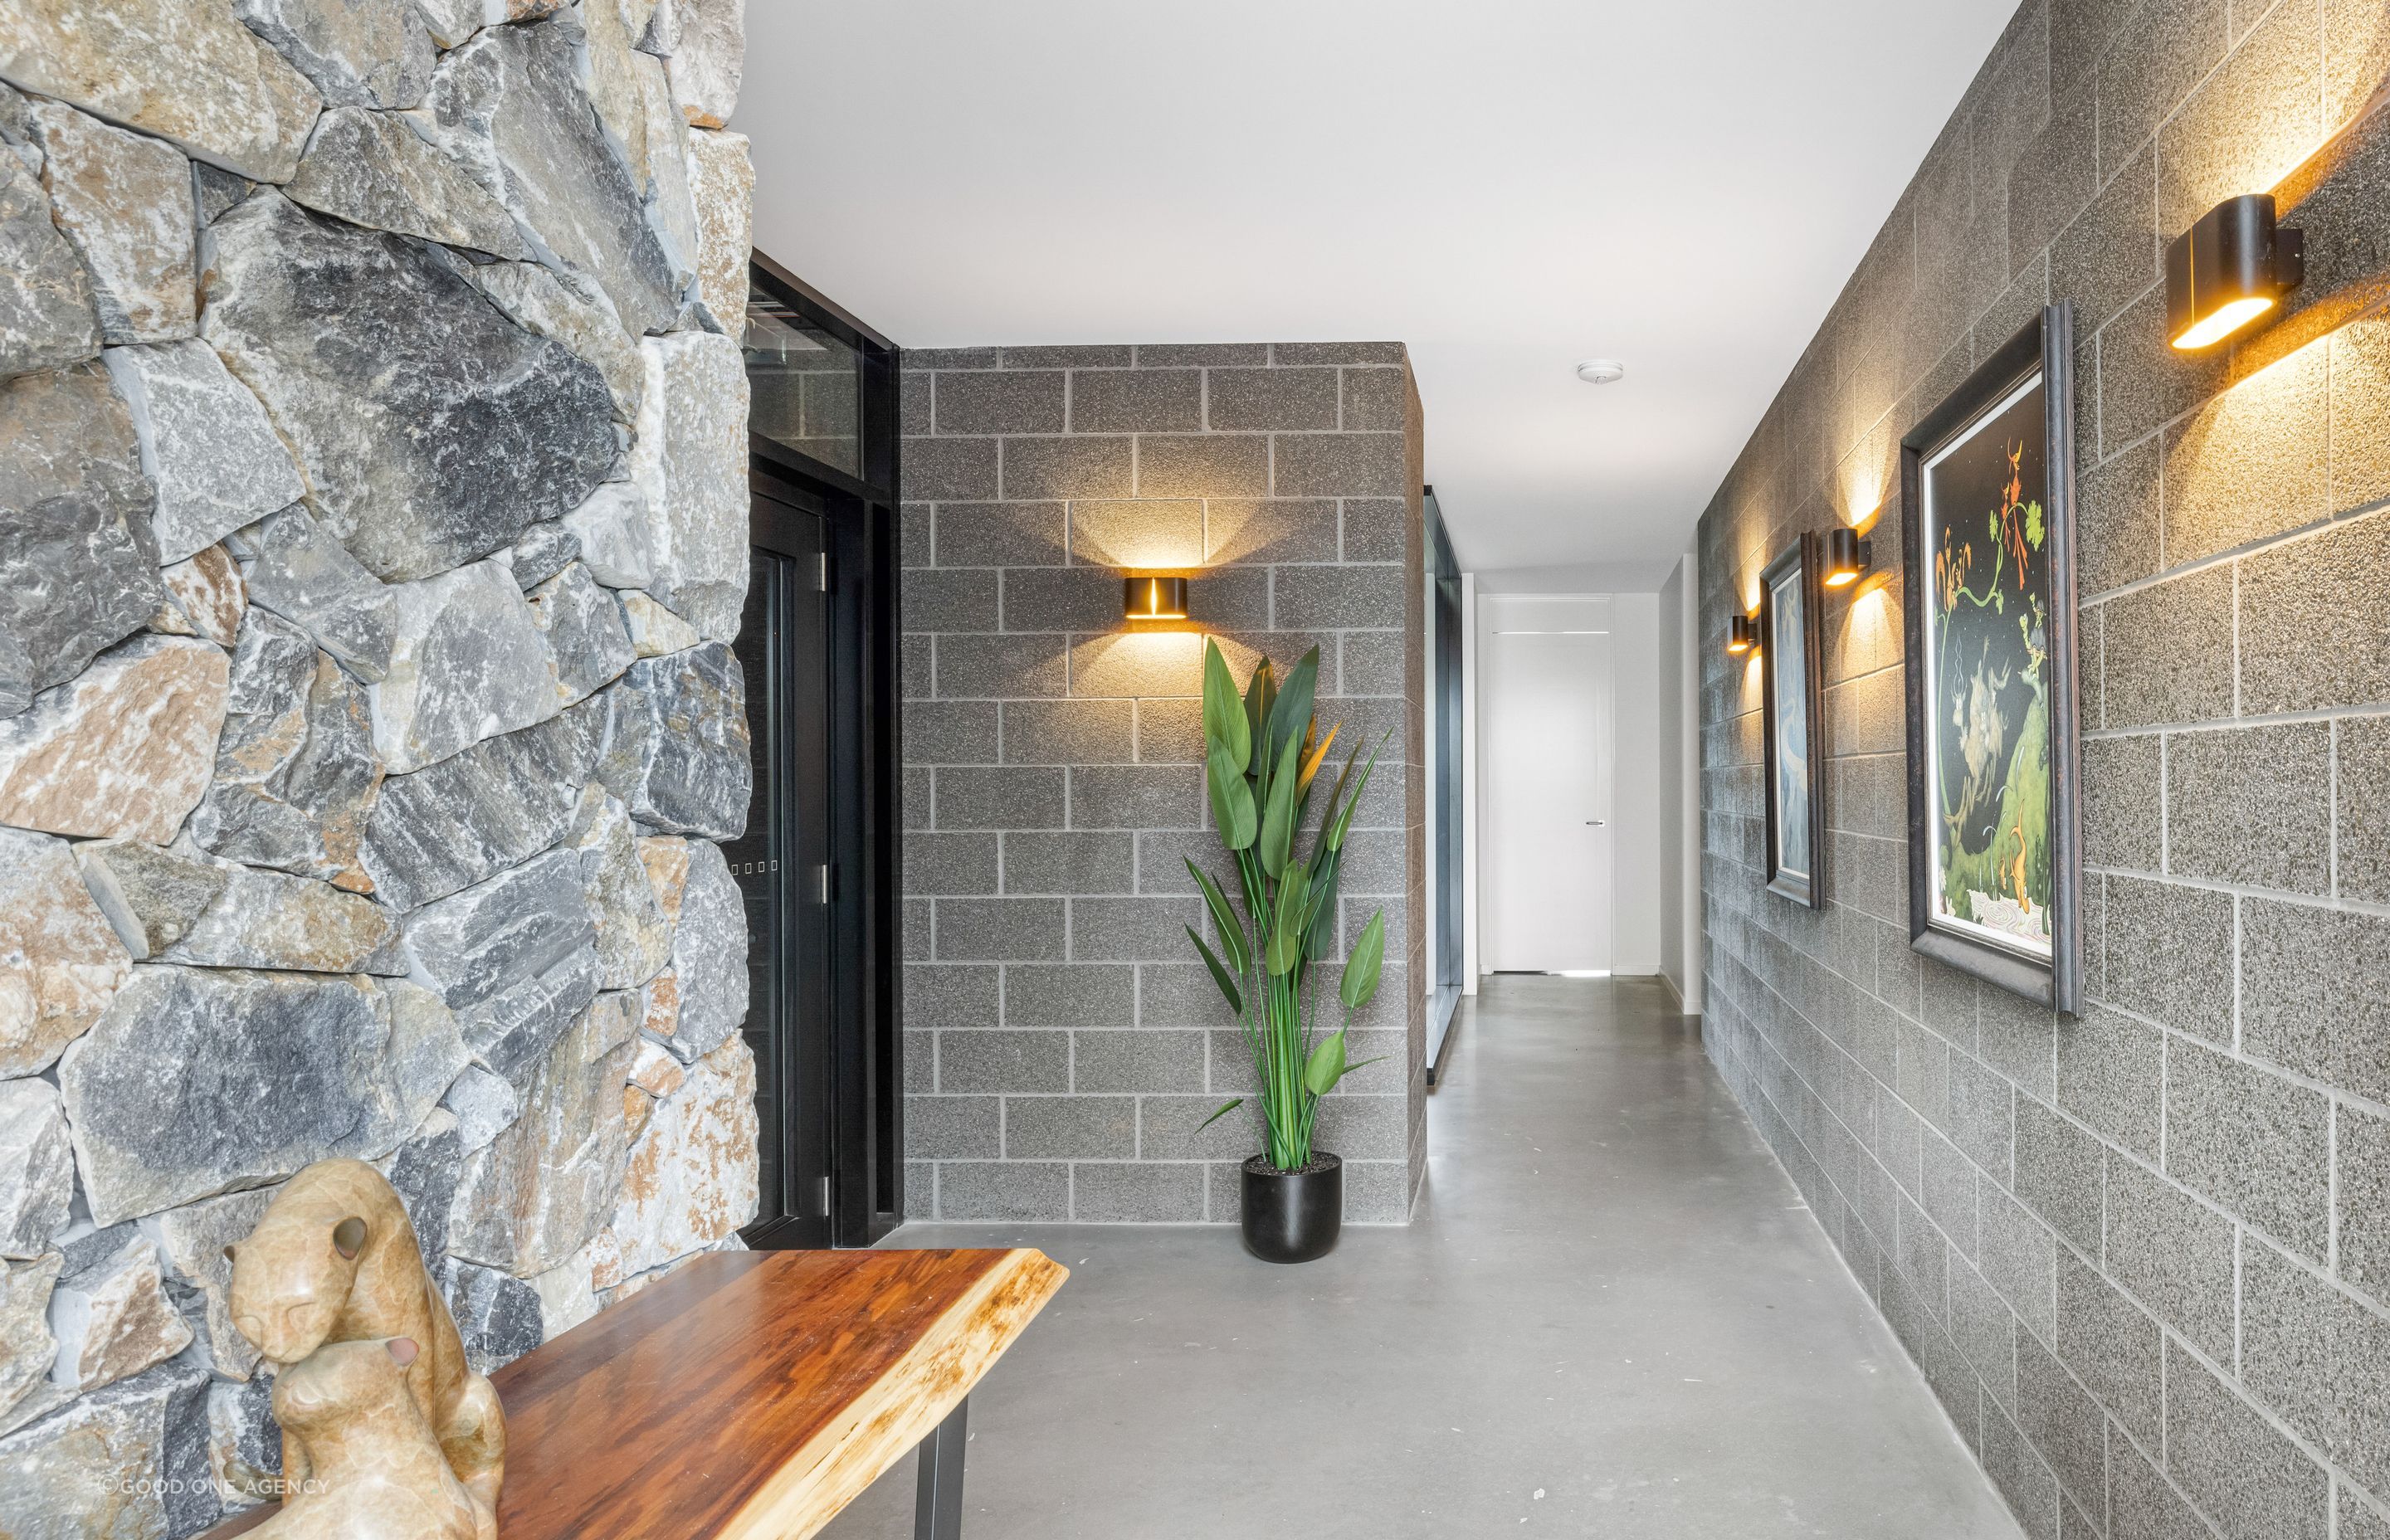 The stone walls and blockwork weave in from outside, creating a seamless transition between interior and exterior.